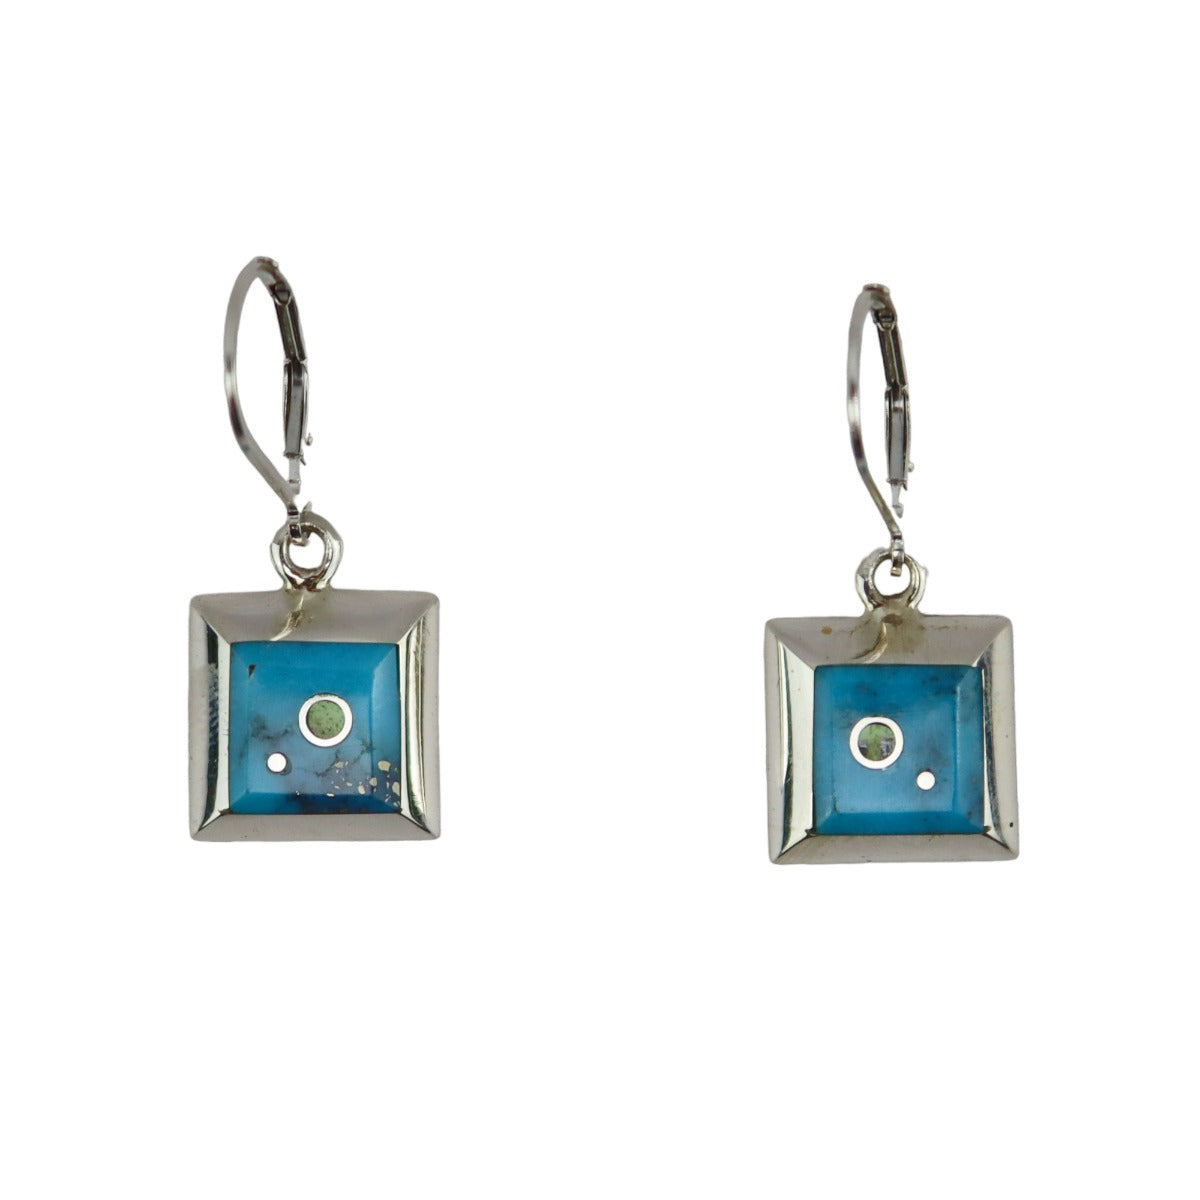 Veronica Benally - Navajo - Contemporary Multi-Stone Inlay and Sterling Silver Hook Earrings (J15898-006)